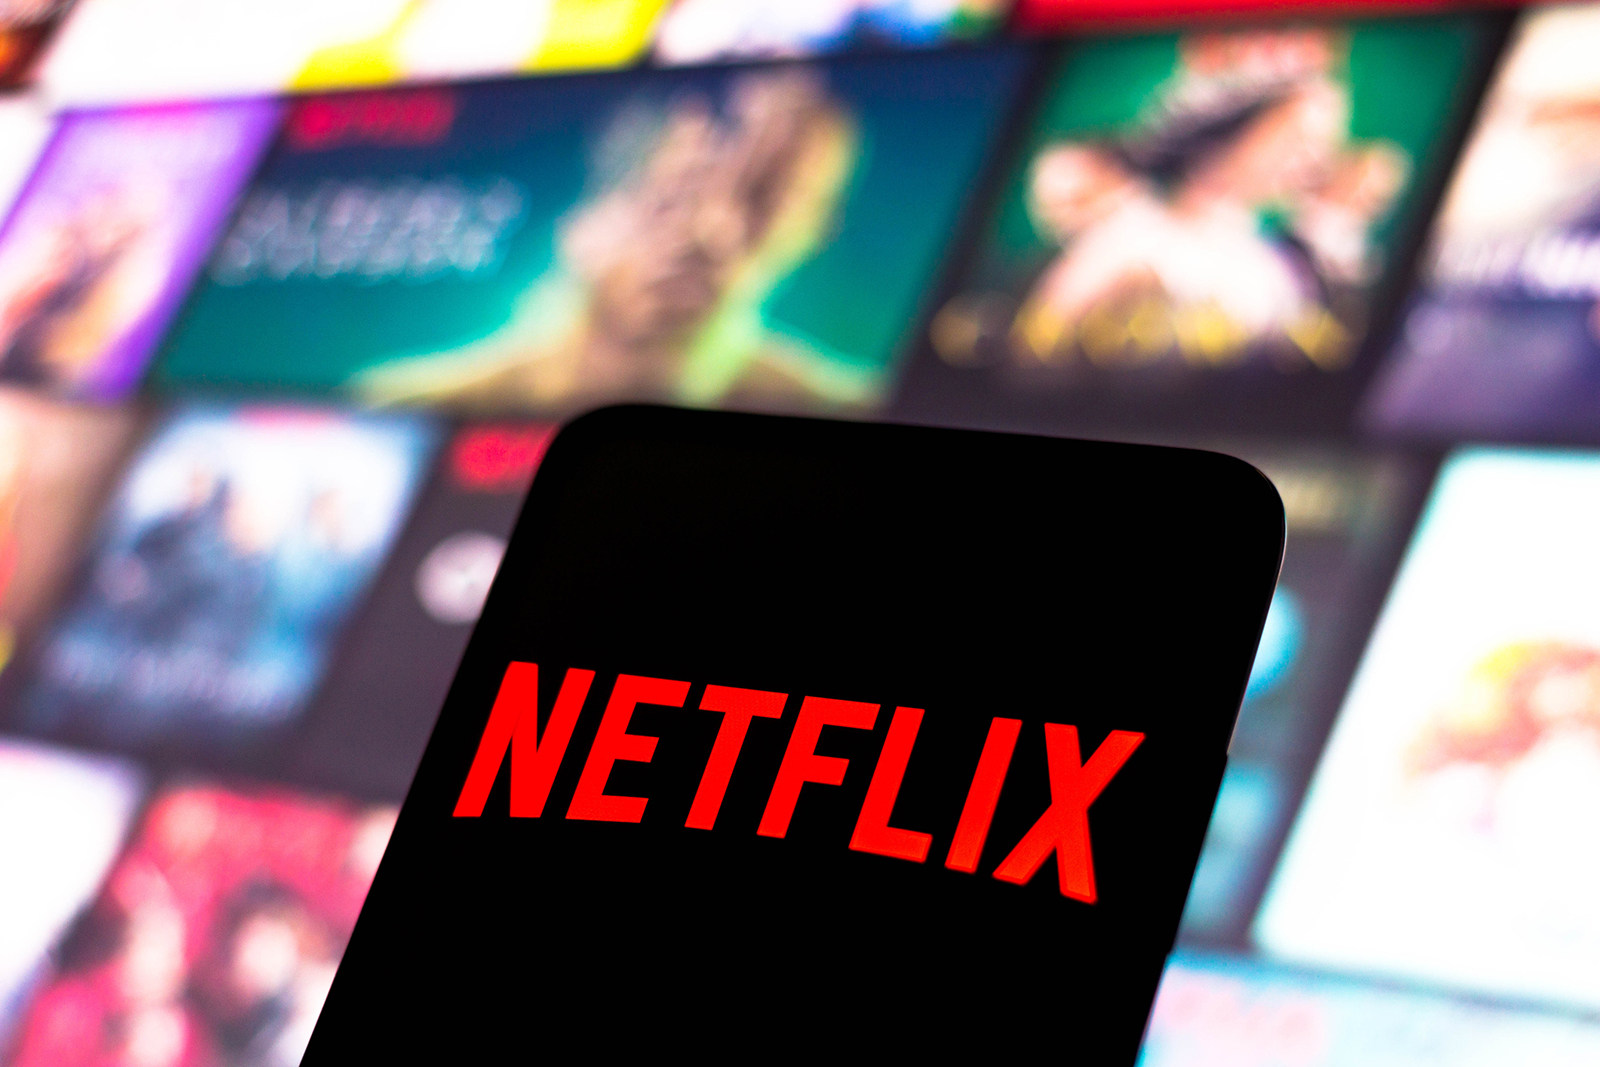 Netflix said early this year that more than 100 million households were sharing accounts at the service. File photo: TNS